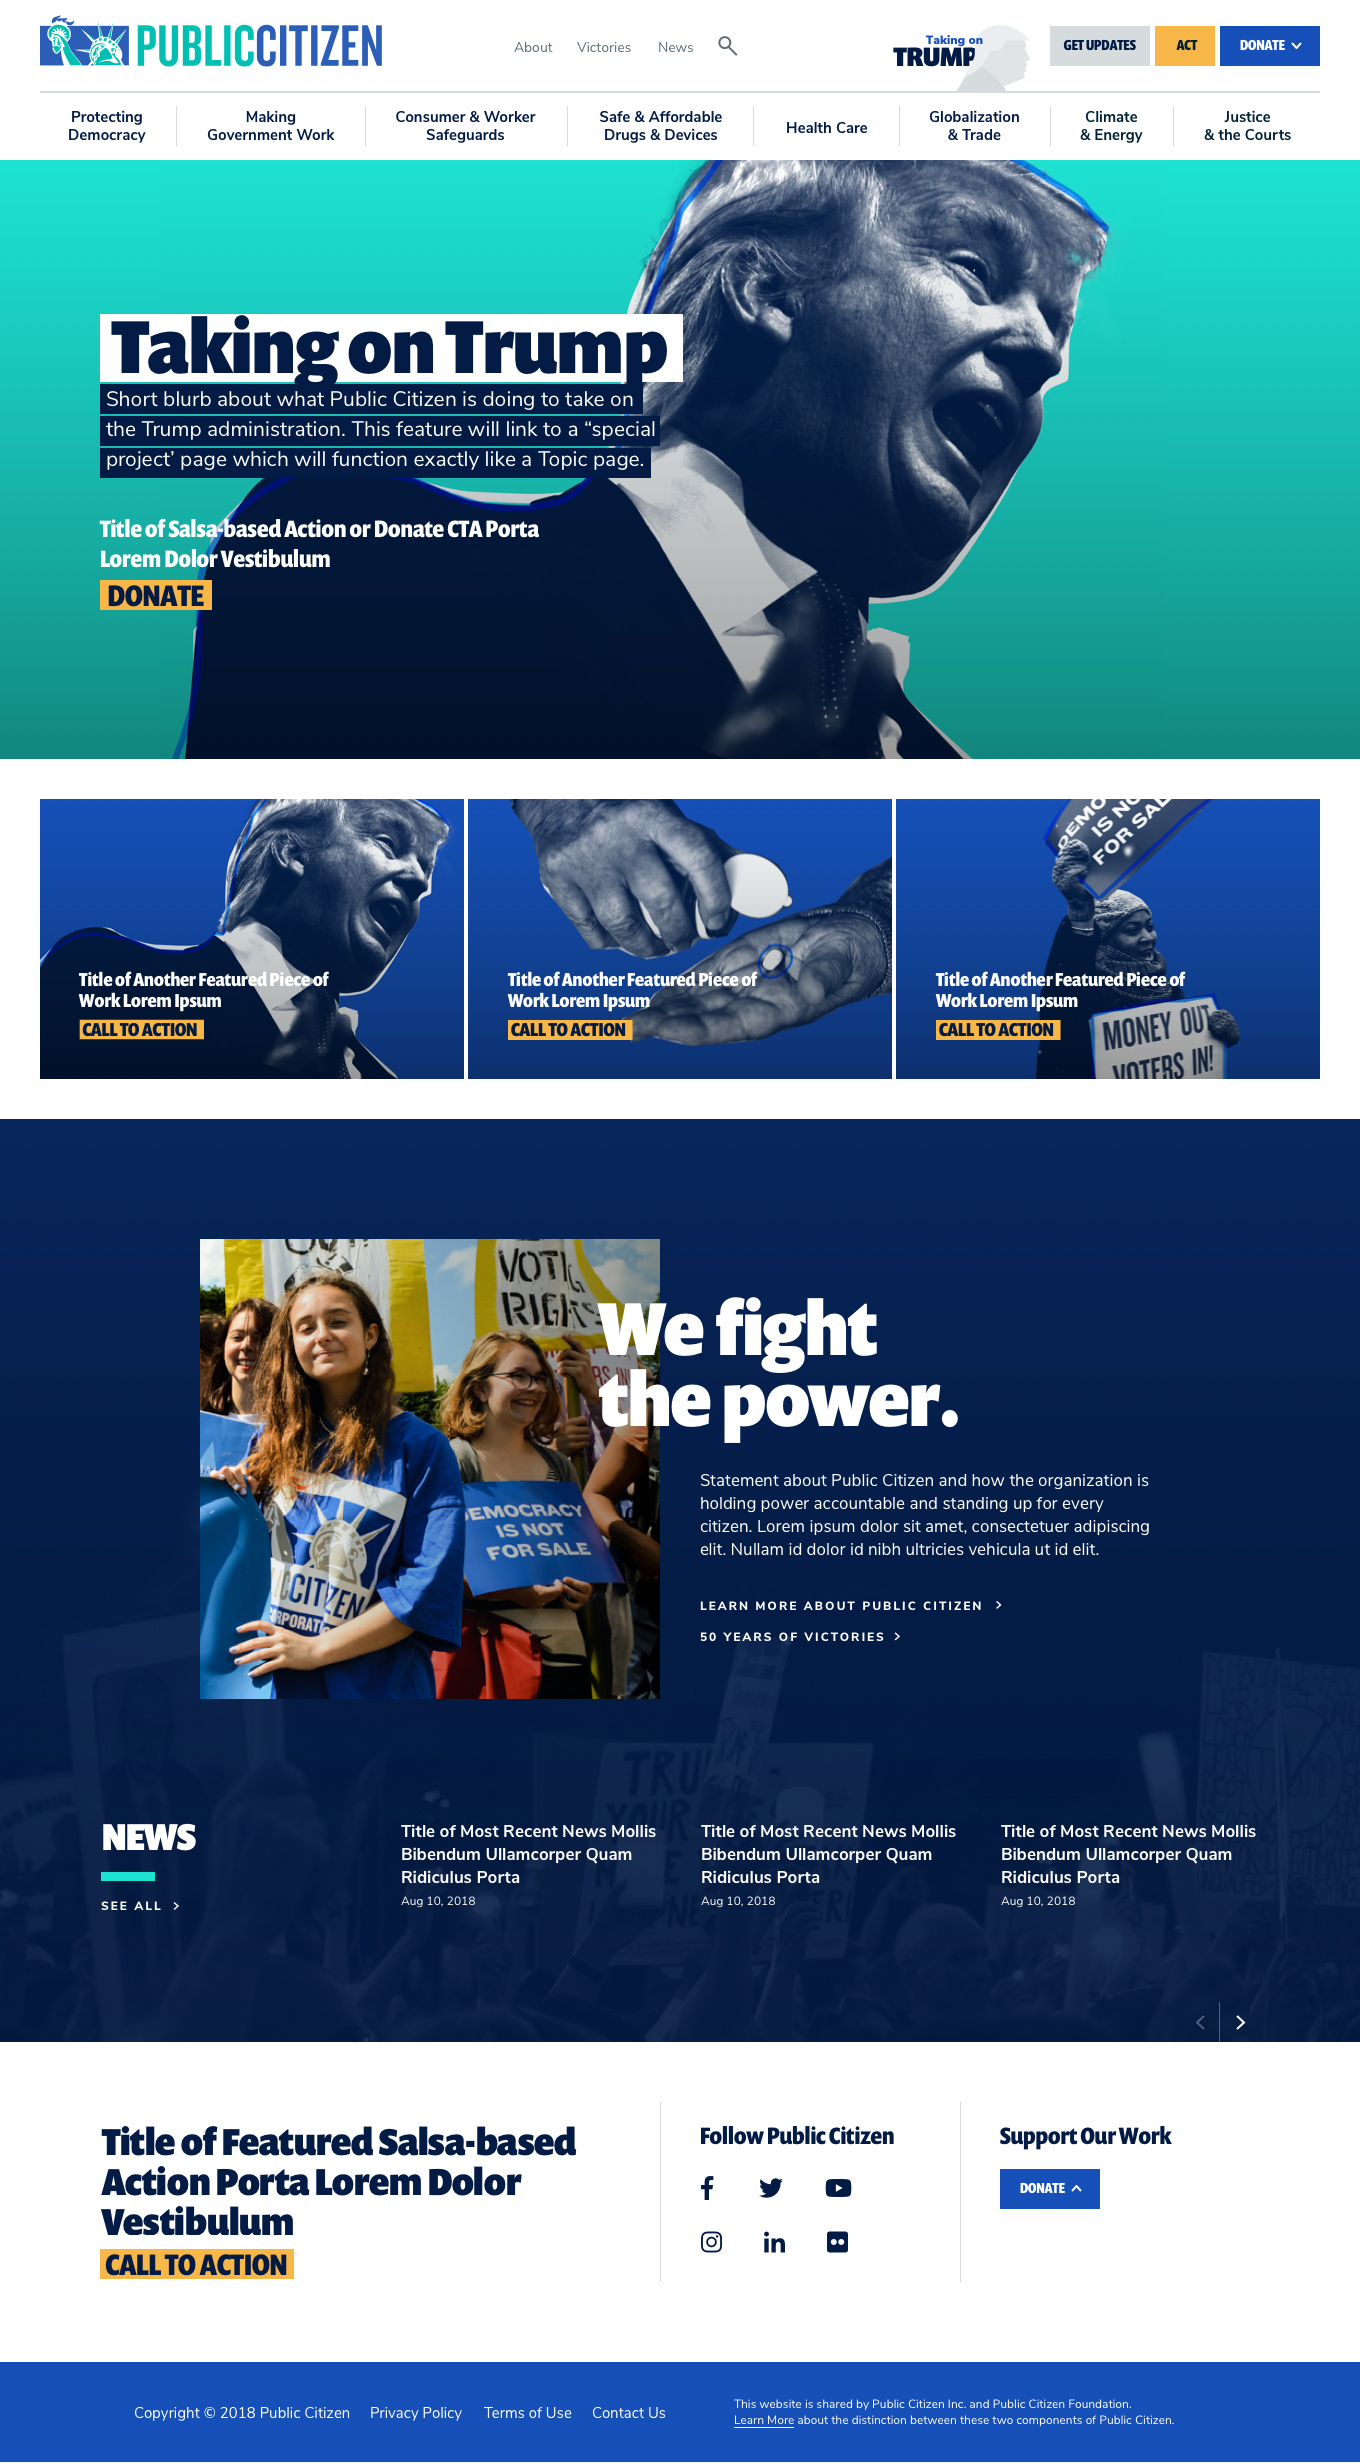 Image of the redesigned homepage for Public Citizen's website